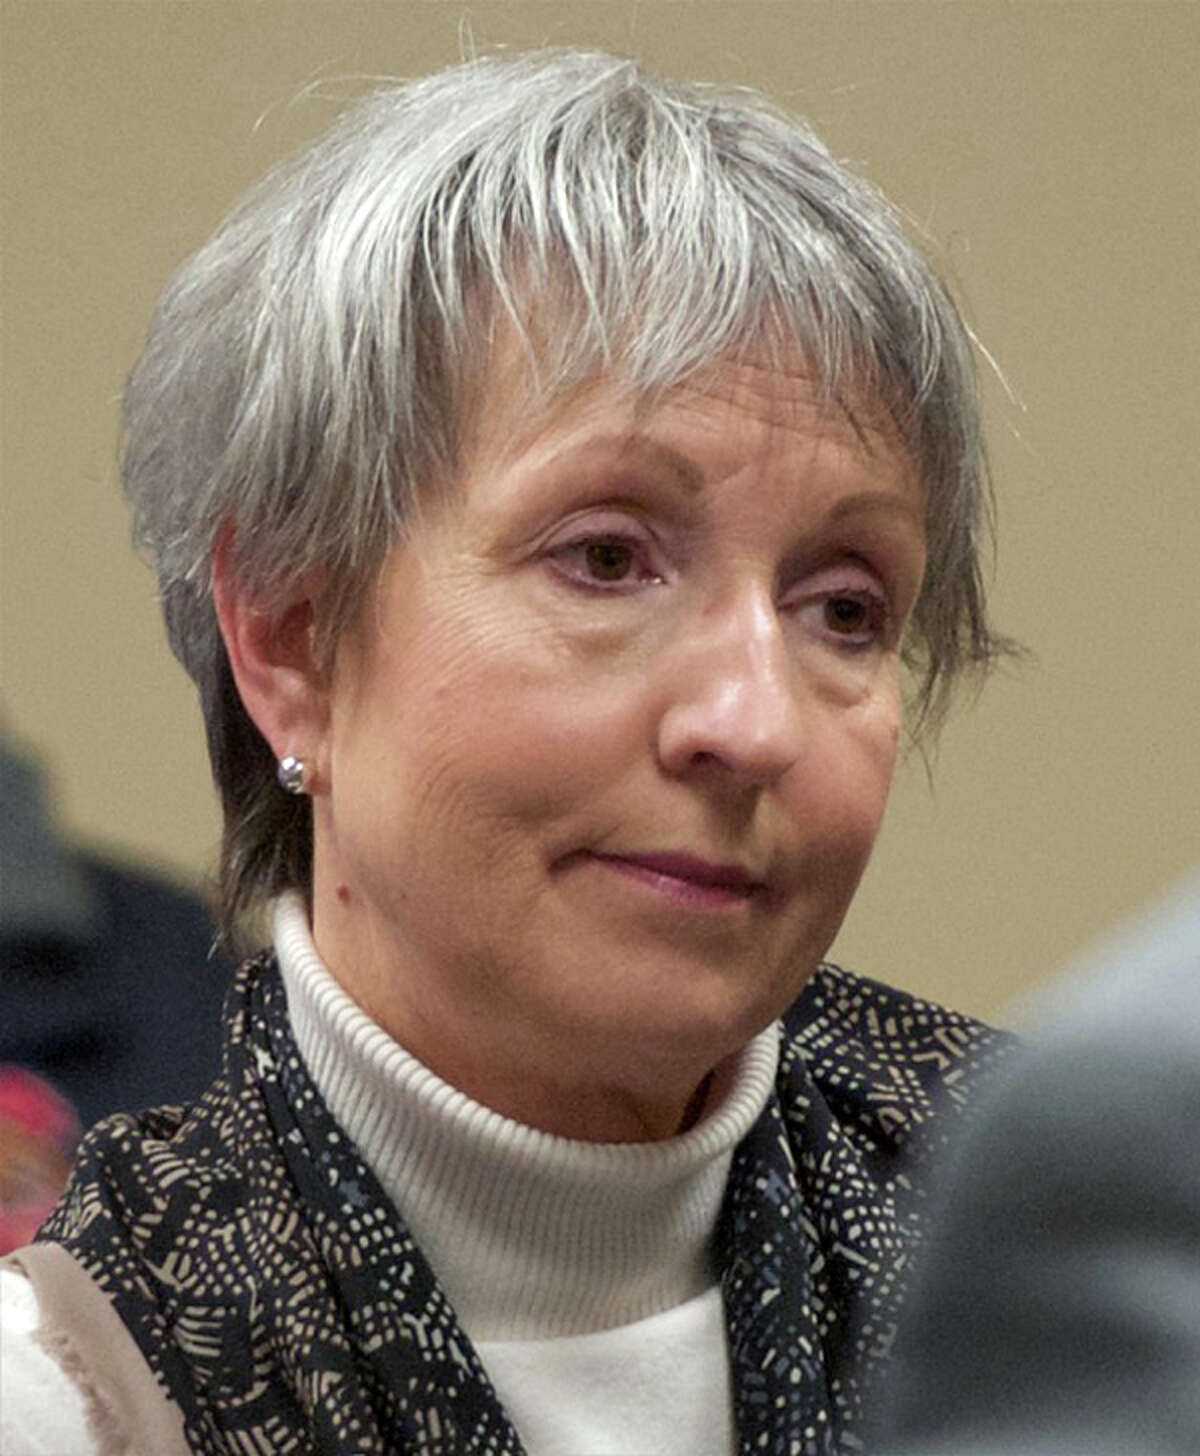 Jane Miller is no longer welcome in the local Republican Party in Brookfield, but her husband Larry will be allowed to stay after the town GOP registrar and Republican committee chair ruling in their party discipline case.